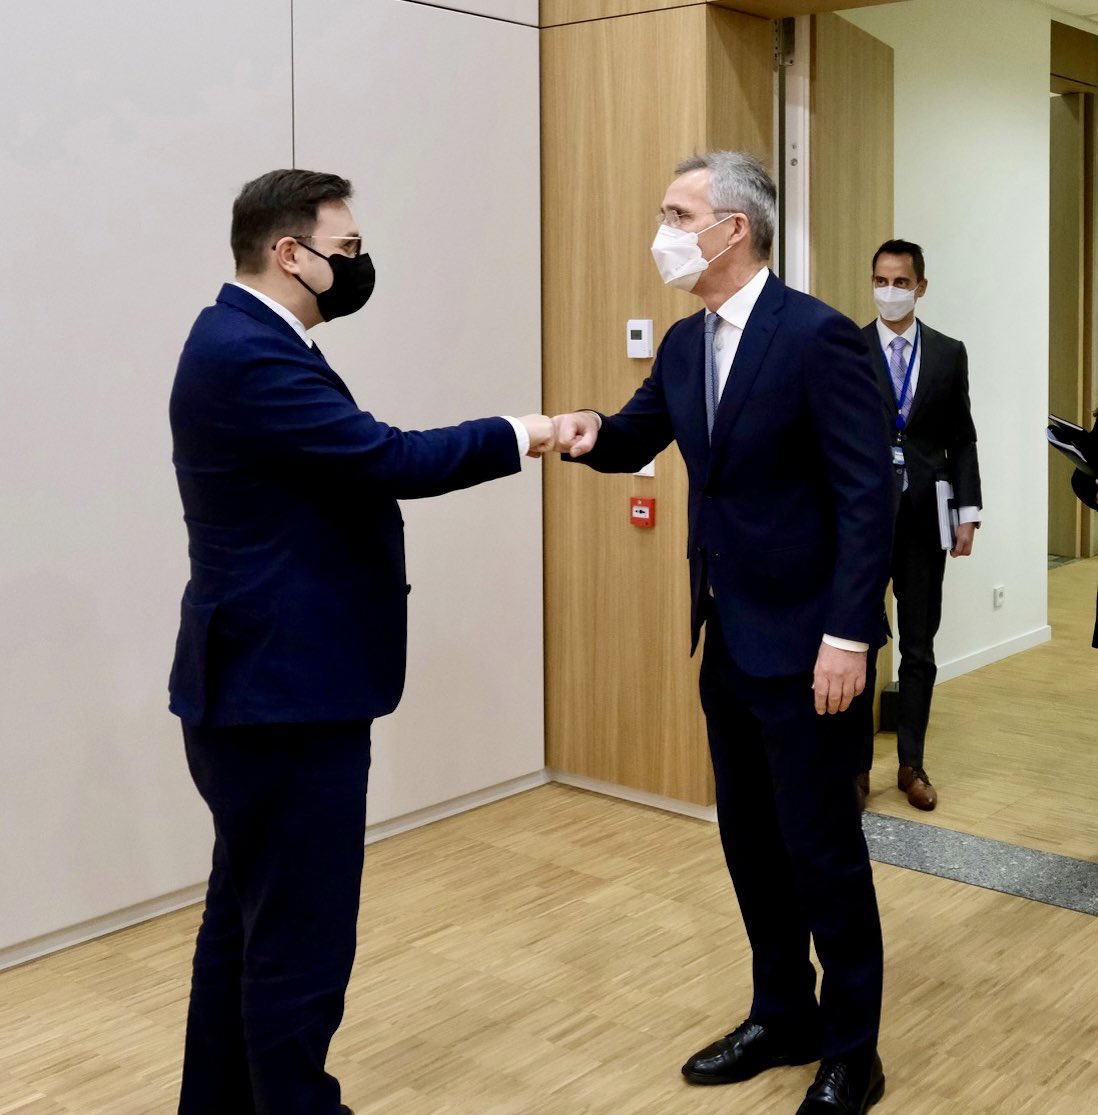 JanLipavsky: I met @jensstoltenberg to reiterate that Czech Republic puts great emphasis on the Alliance and transatlantic relations. We are ready to meet our @NATO commitments, including on defense spending. We agreed on support for Ukraine and the unacceptability of the Russian demands.